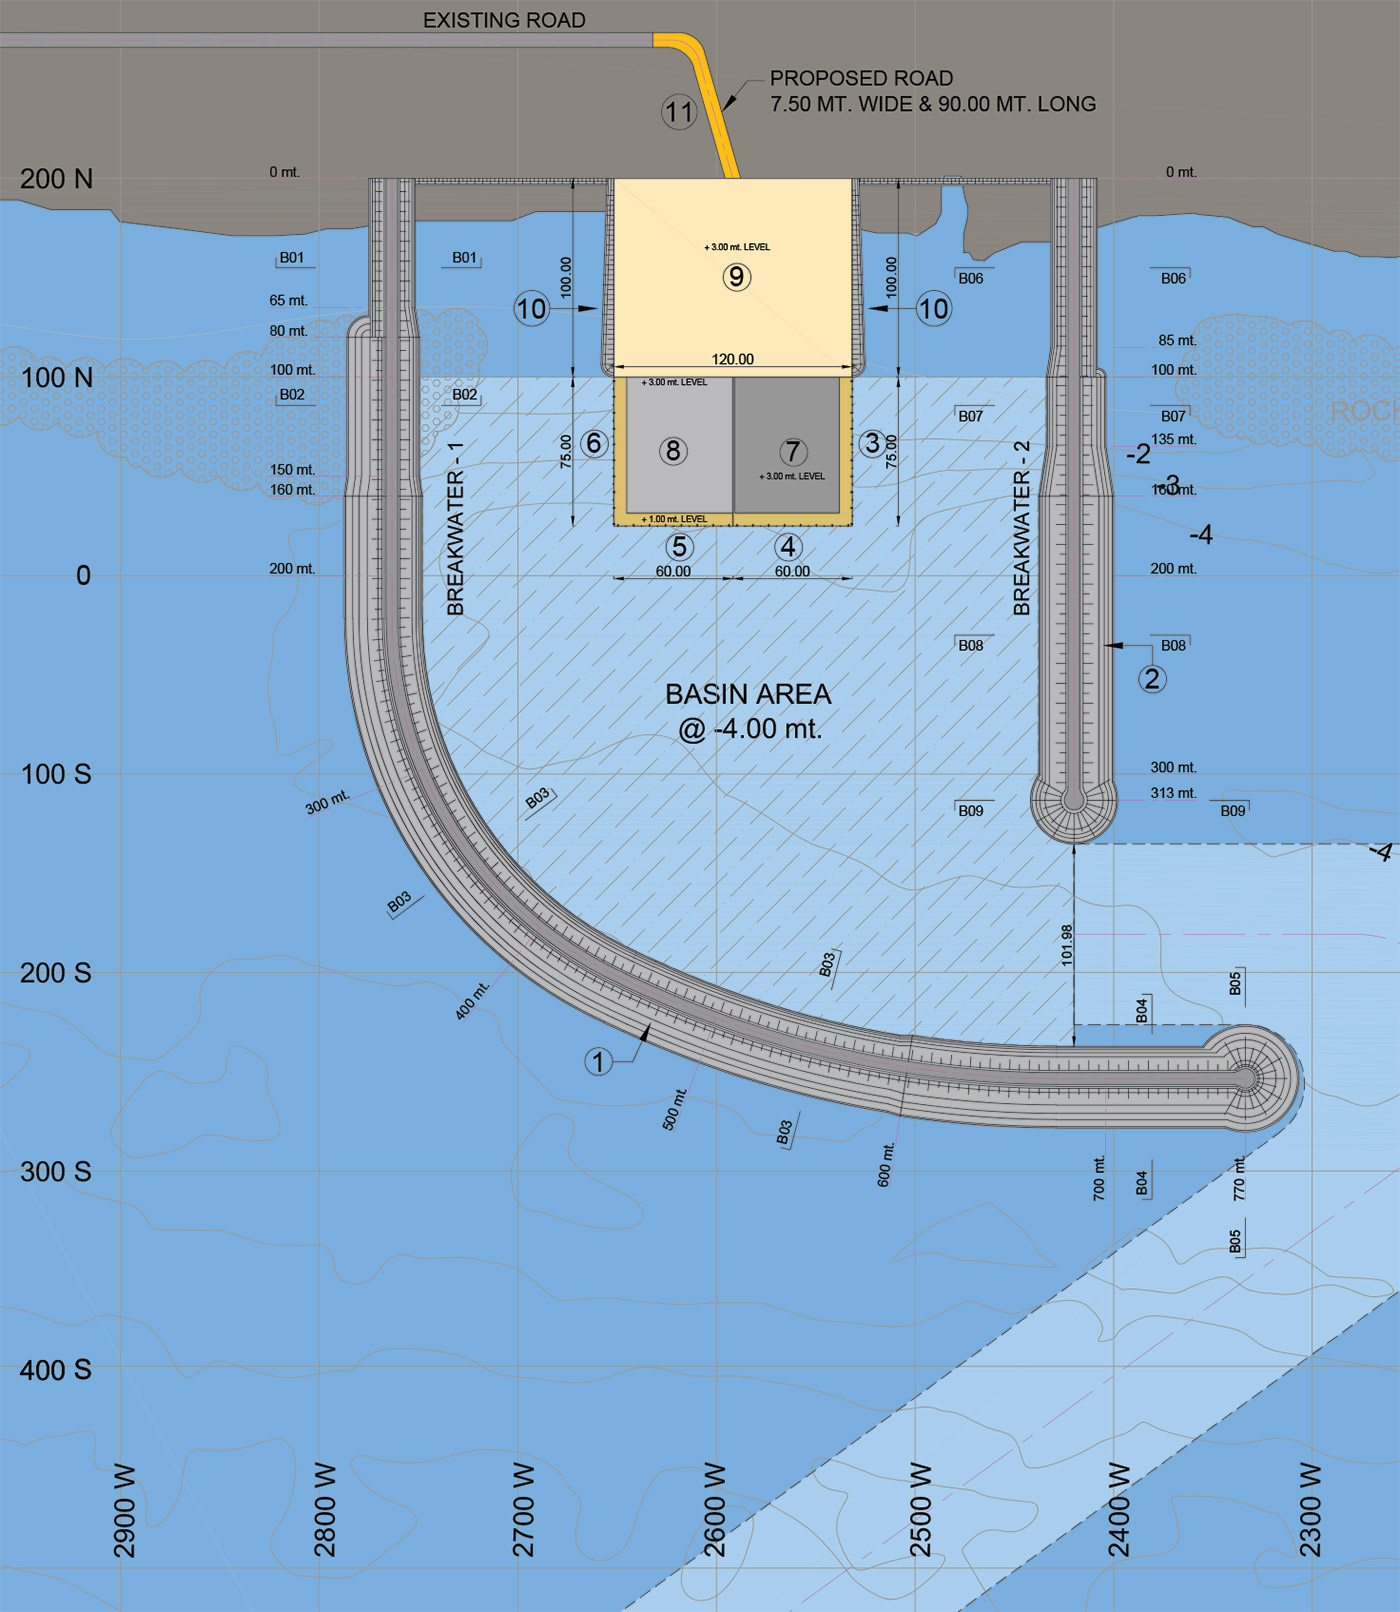 MAP OF THE BASIN SHOWING THE BREAKWATER